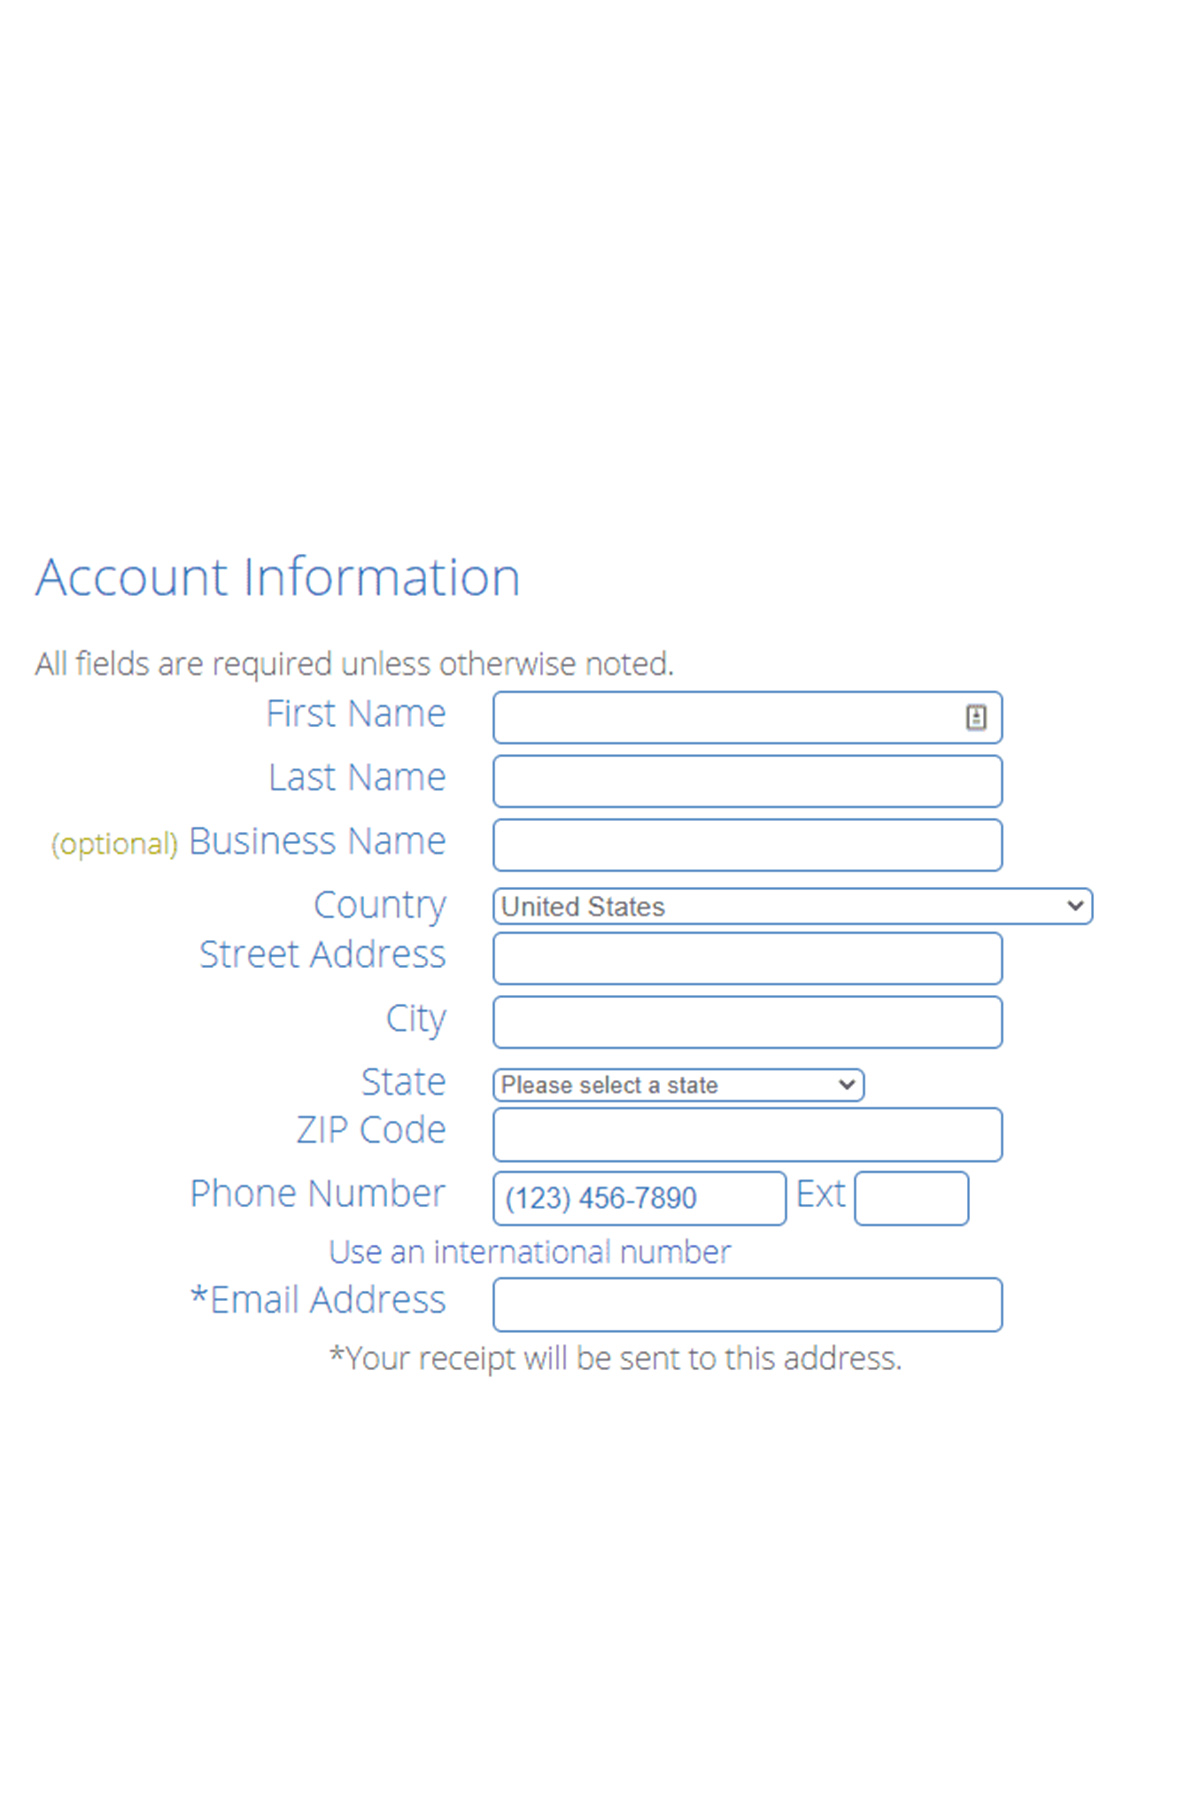 Bluehost account information form